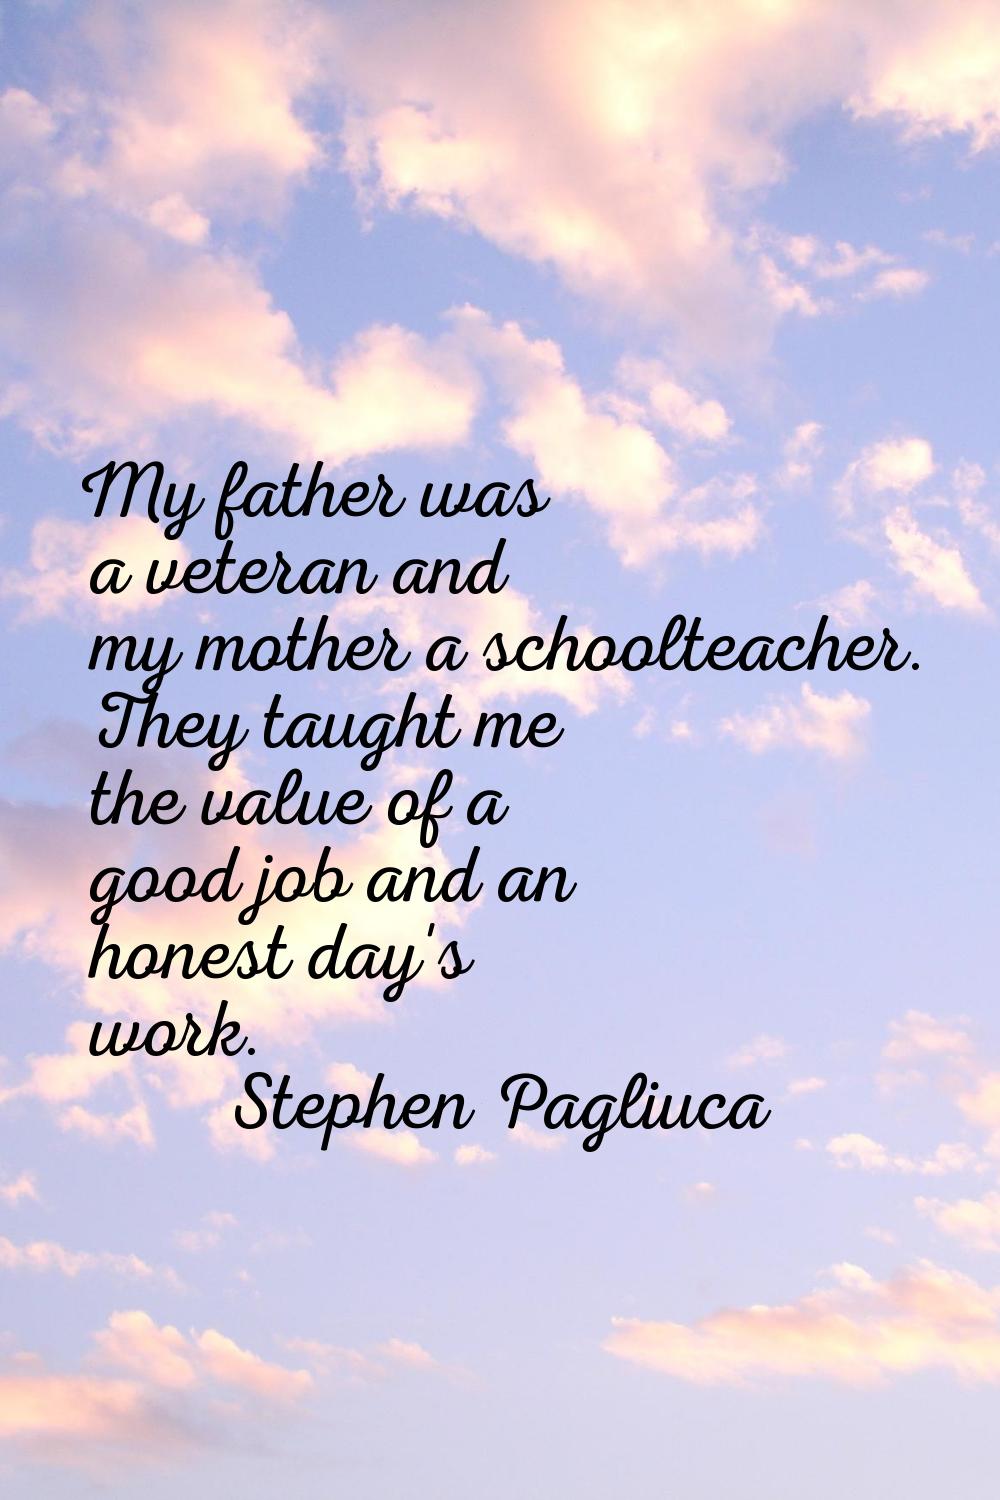 My father was a veteran and my mother a schoolteacher. They taught me the value of a good job and a